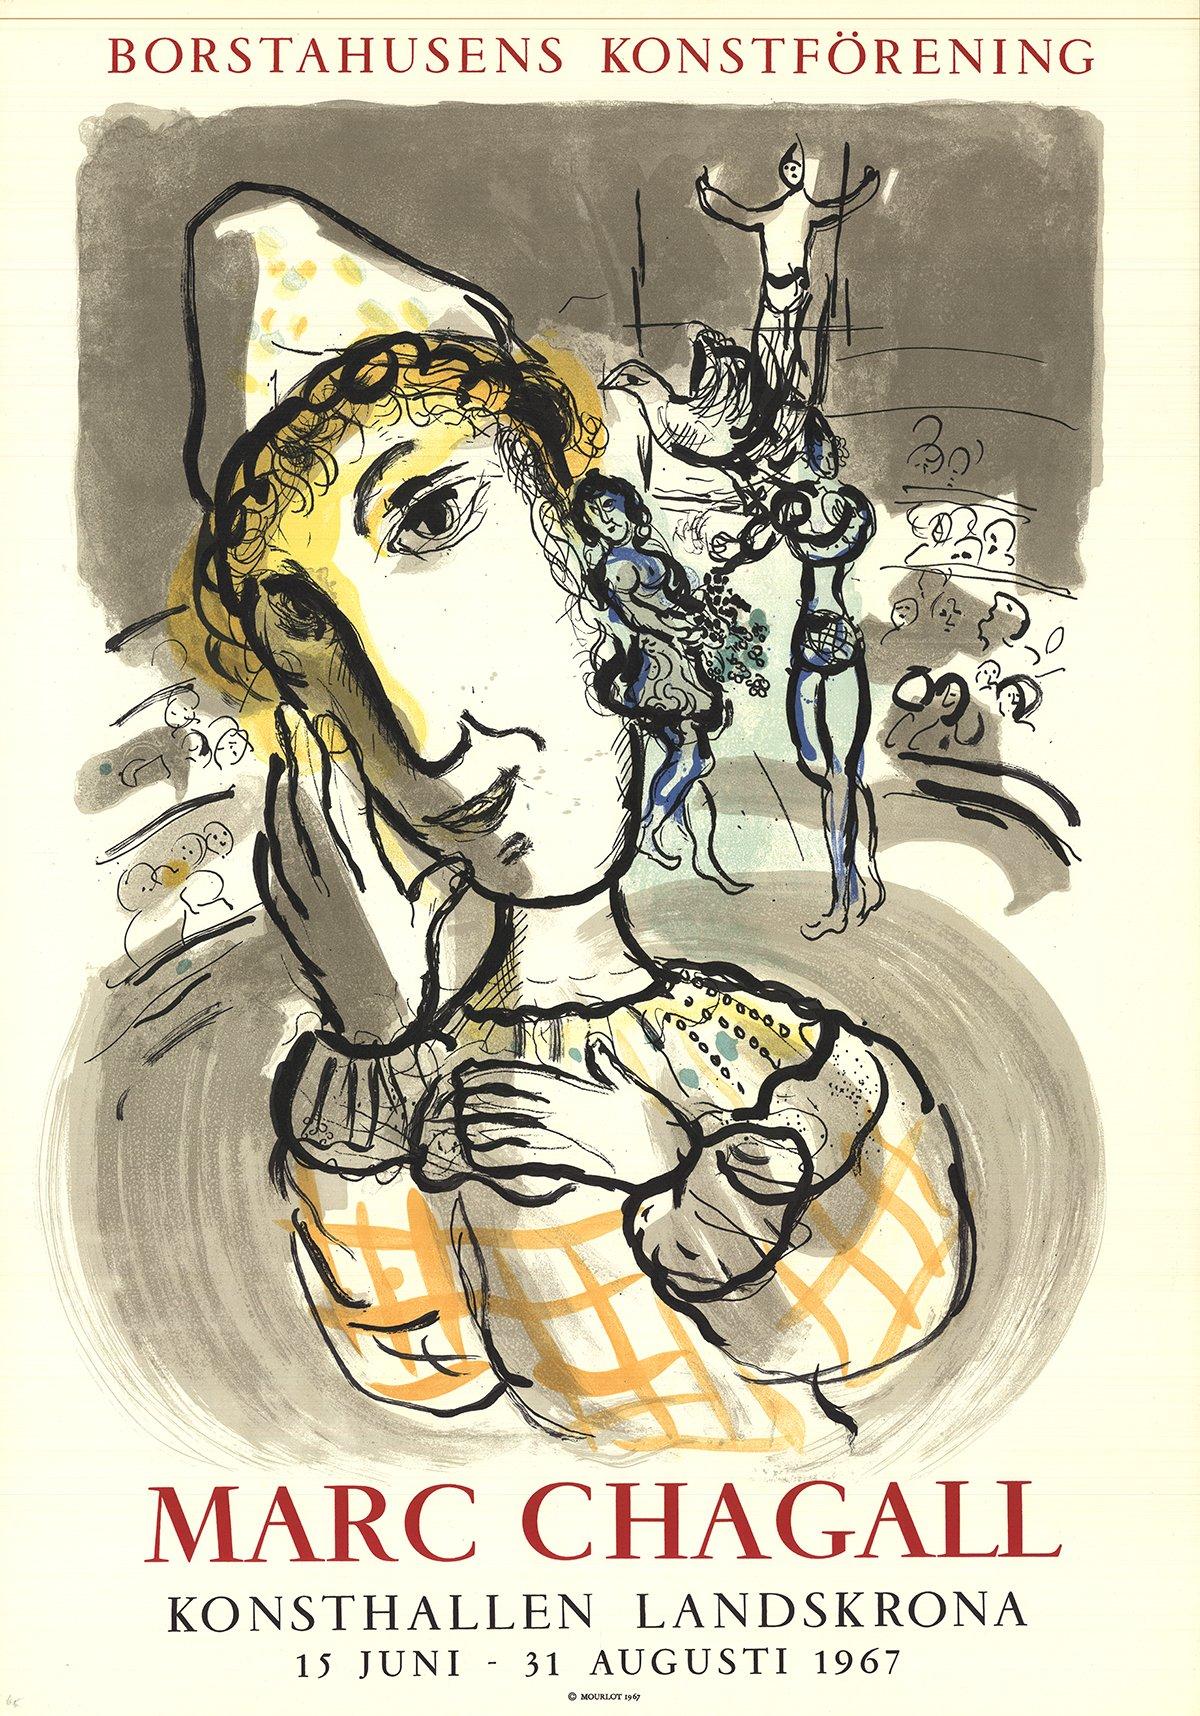 1967 After Marc Chagall 'Circus with Yellow Clown' 